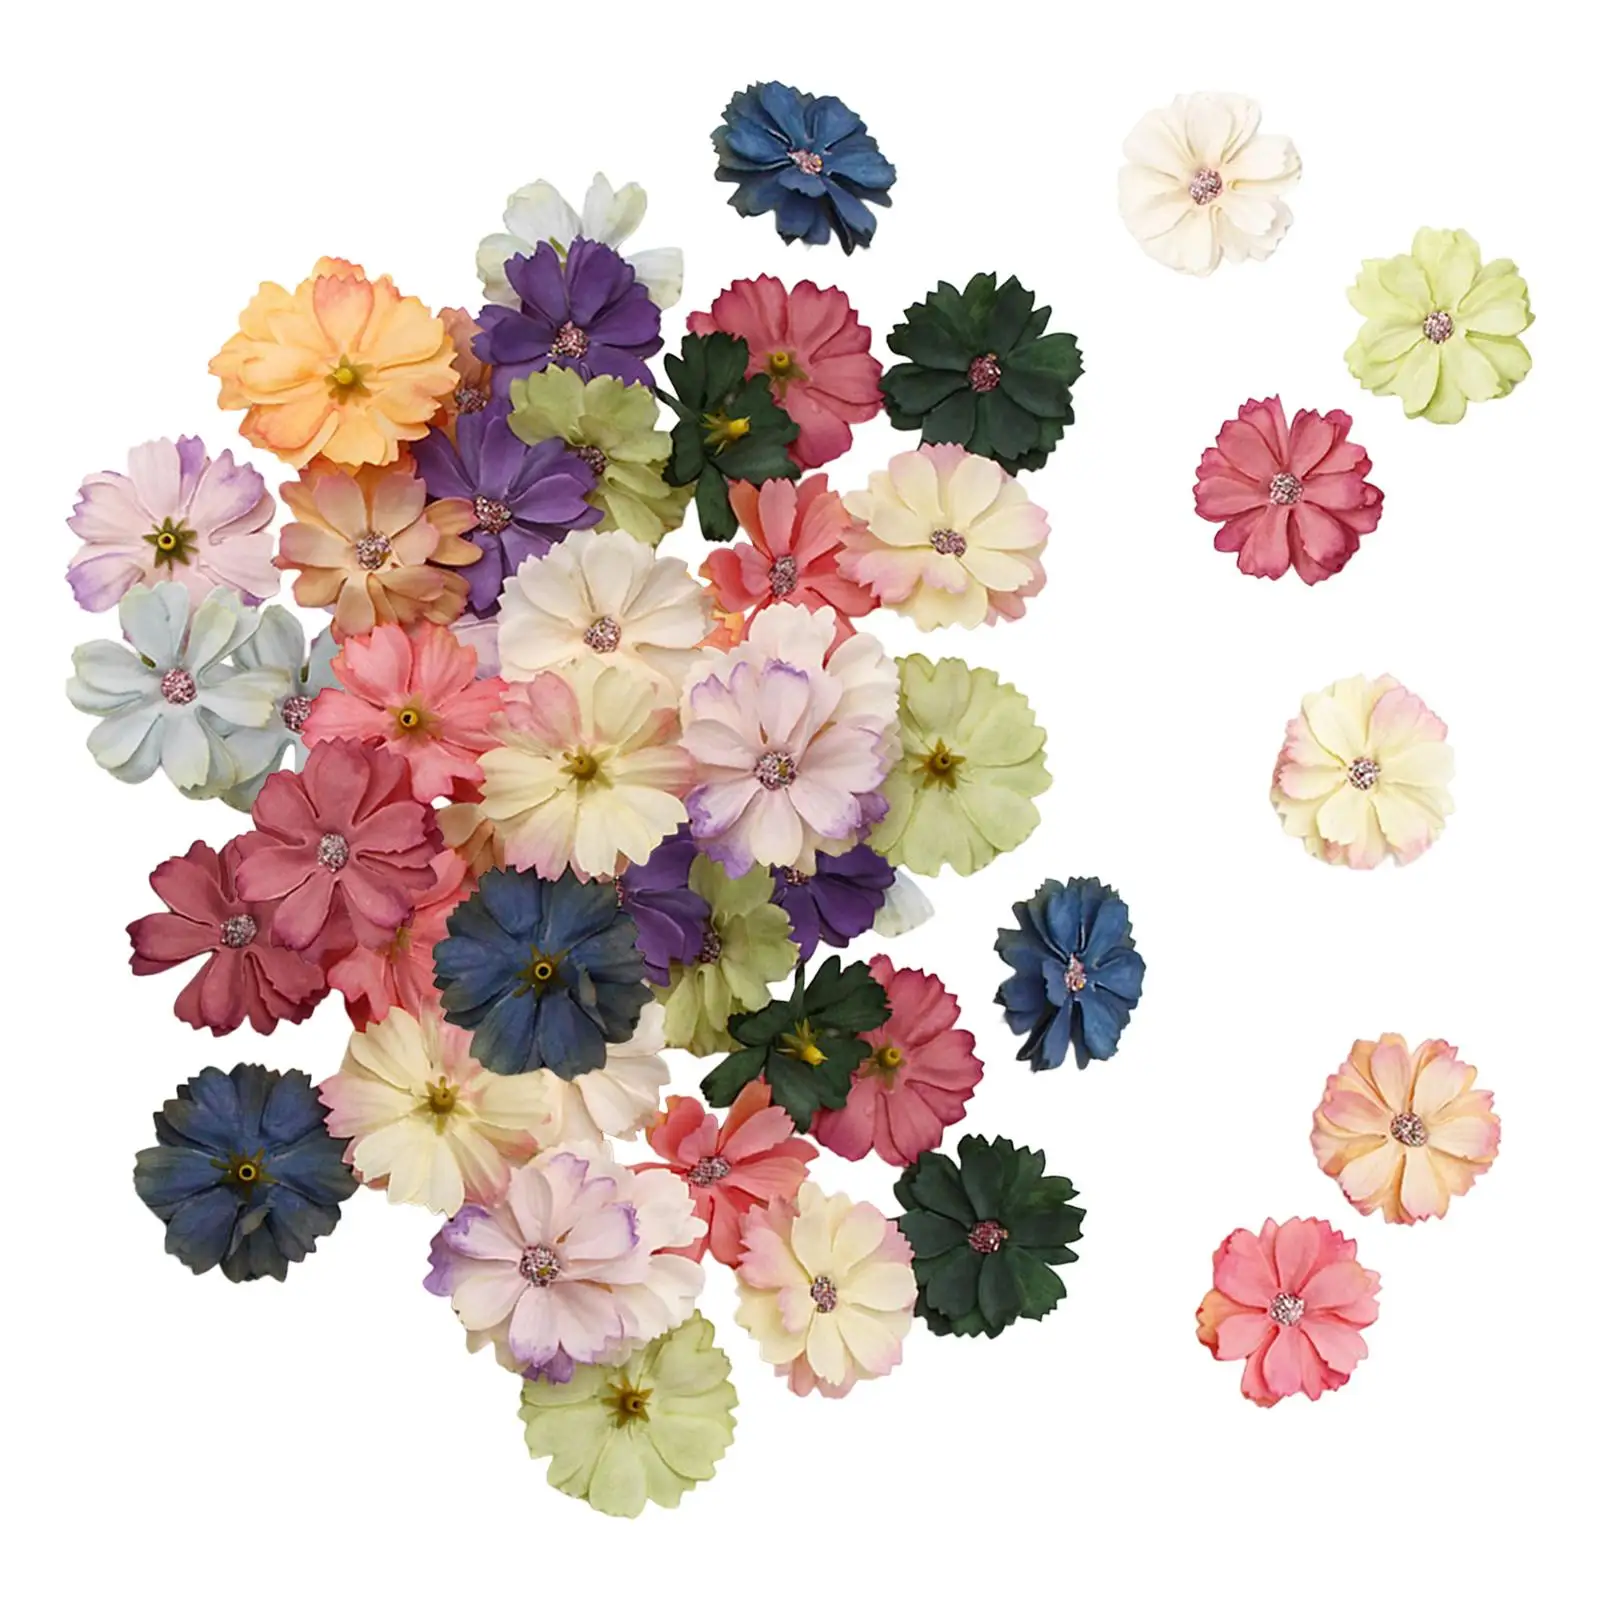 50Pcs Mixed Artificial Flowers Head Floral Crafts Faux Flower Heads for Indoor and Outdoor Marriage Wedding Decoration DIY Craft